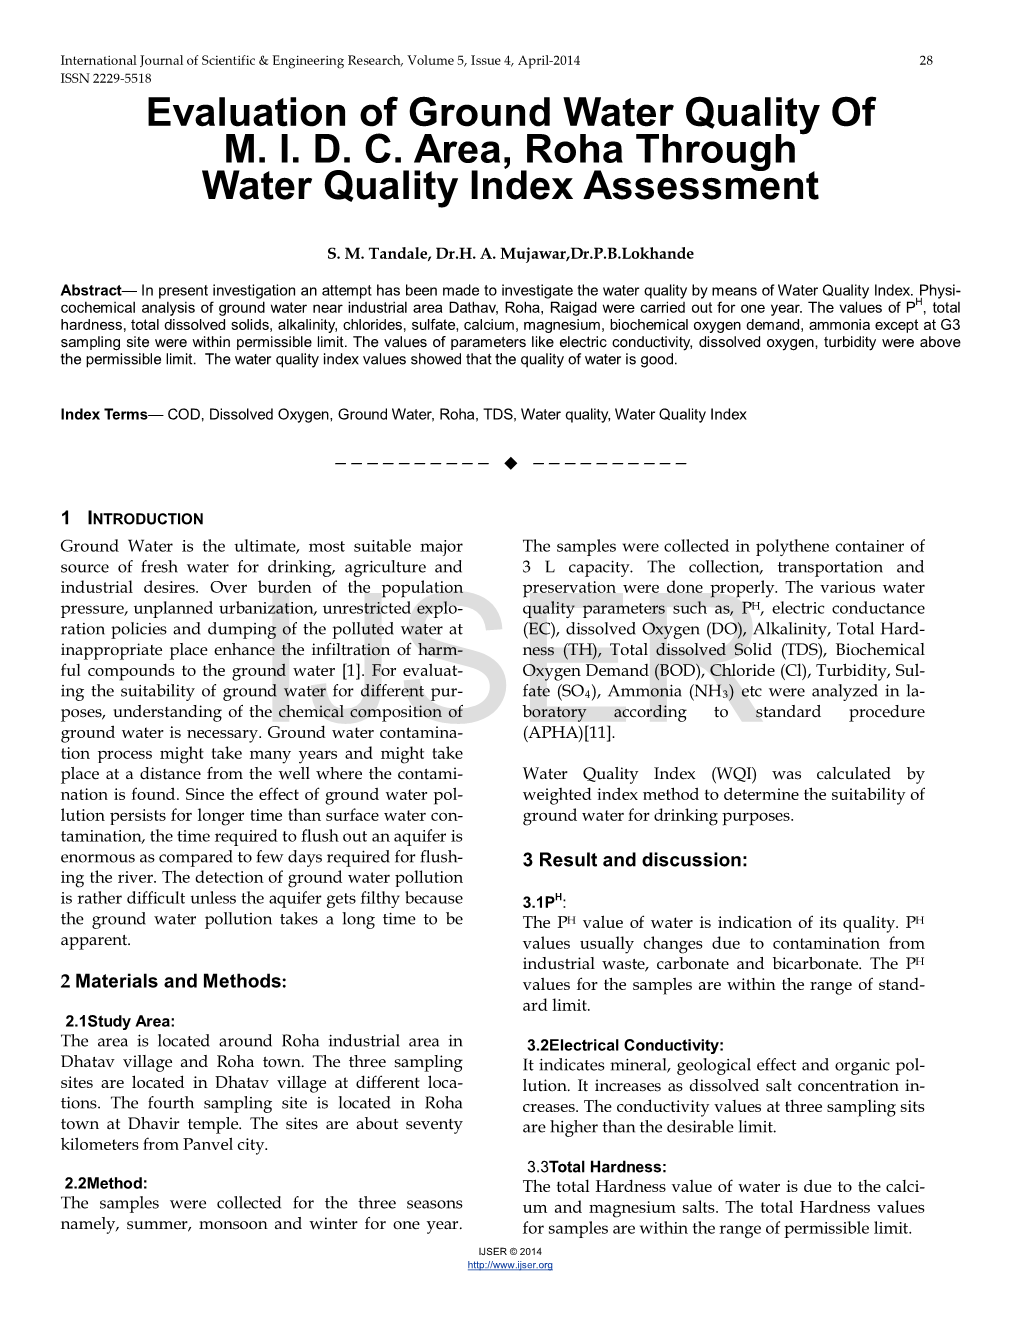 Evaluation of Ground Water Quality of MIDC Area, Roha Through Water